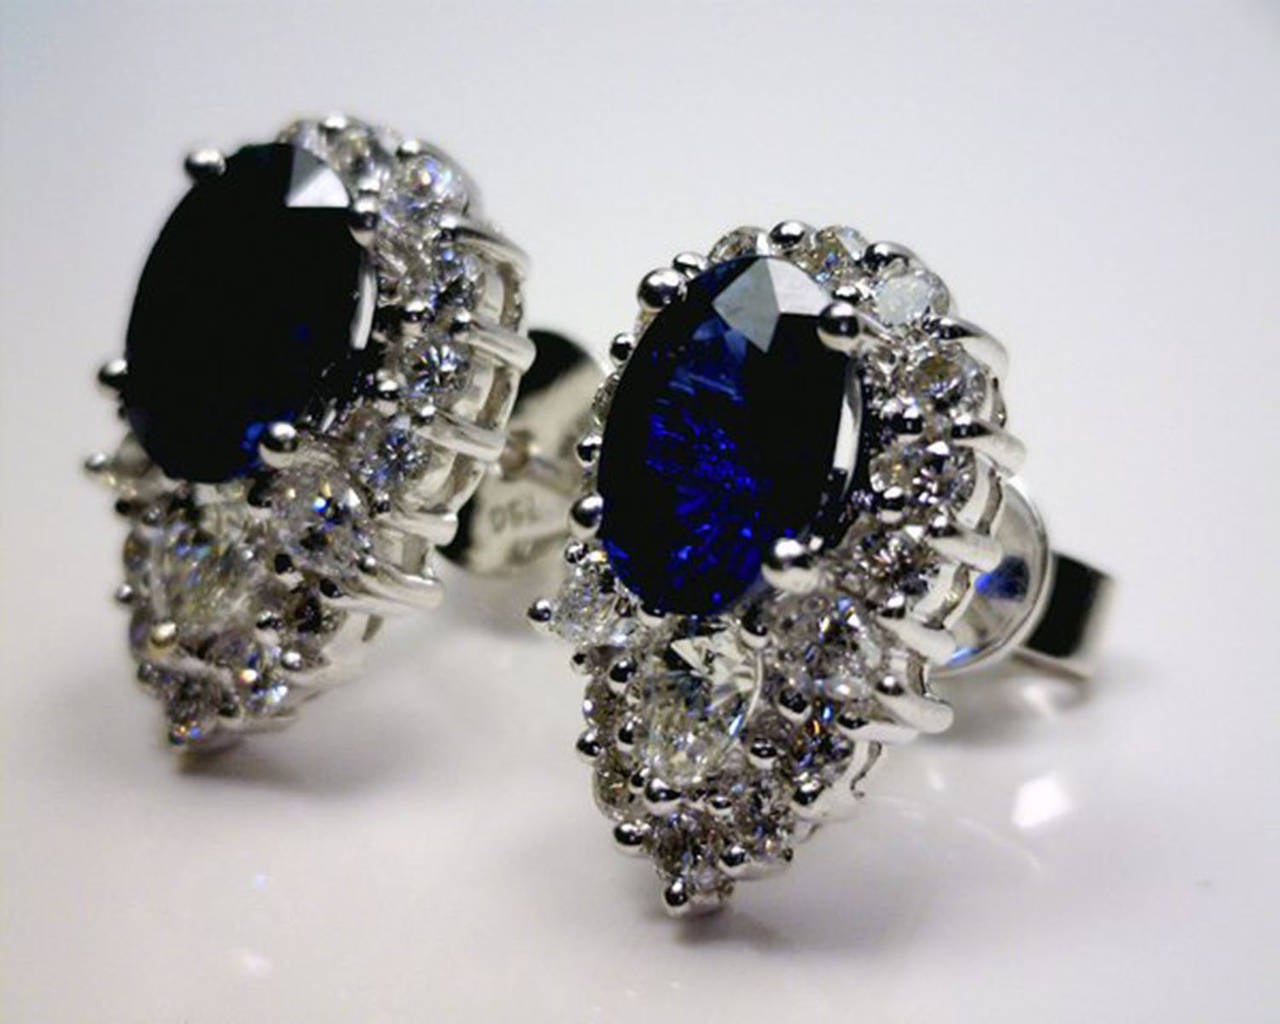 These Modern Earrings have a breathtaking Sparkle to them. Two beautiful oval Sapphires (3.5tcw) are surrounded by pear and round diamonds (1.20tcw) in 18k white gold mounting. Dimensions: 1.5cm long x 1cm wide. Sapphires are 8mm x 6mm. Post with